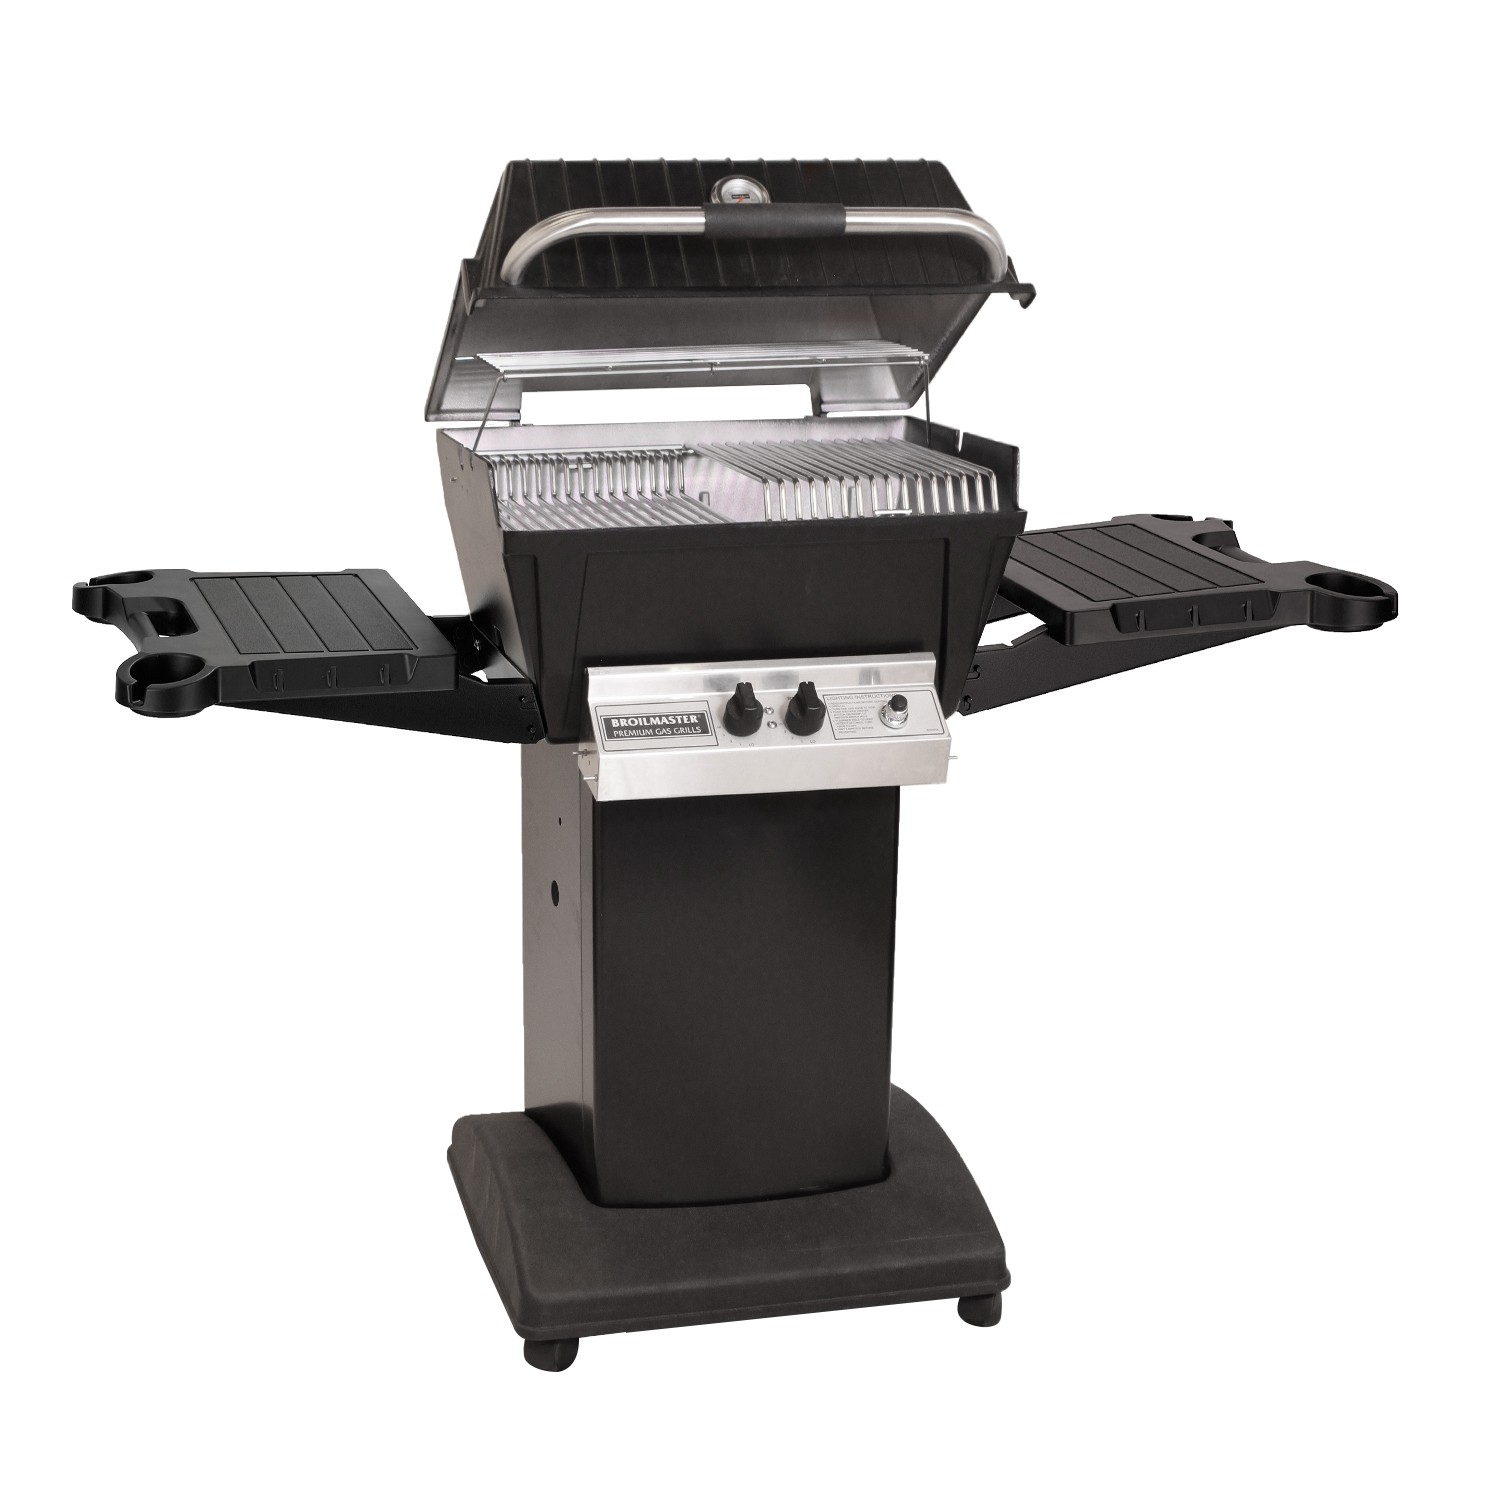 BROILMASTER P4XN PREMIUM SERIES NATURAL GAS GRILL WITH CHARMASTER BRIQUETS - BLACK